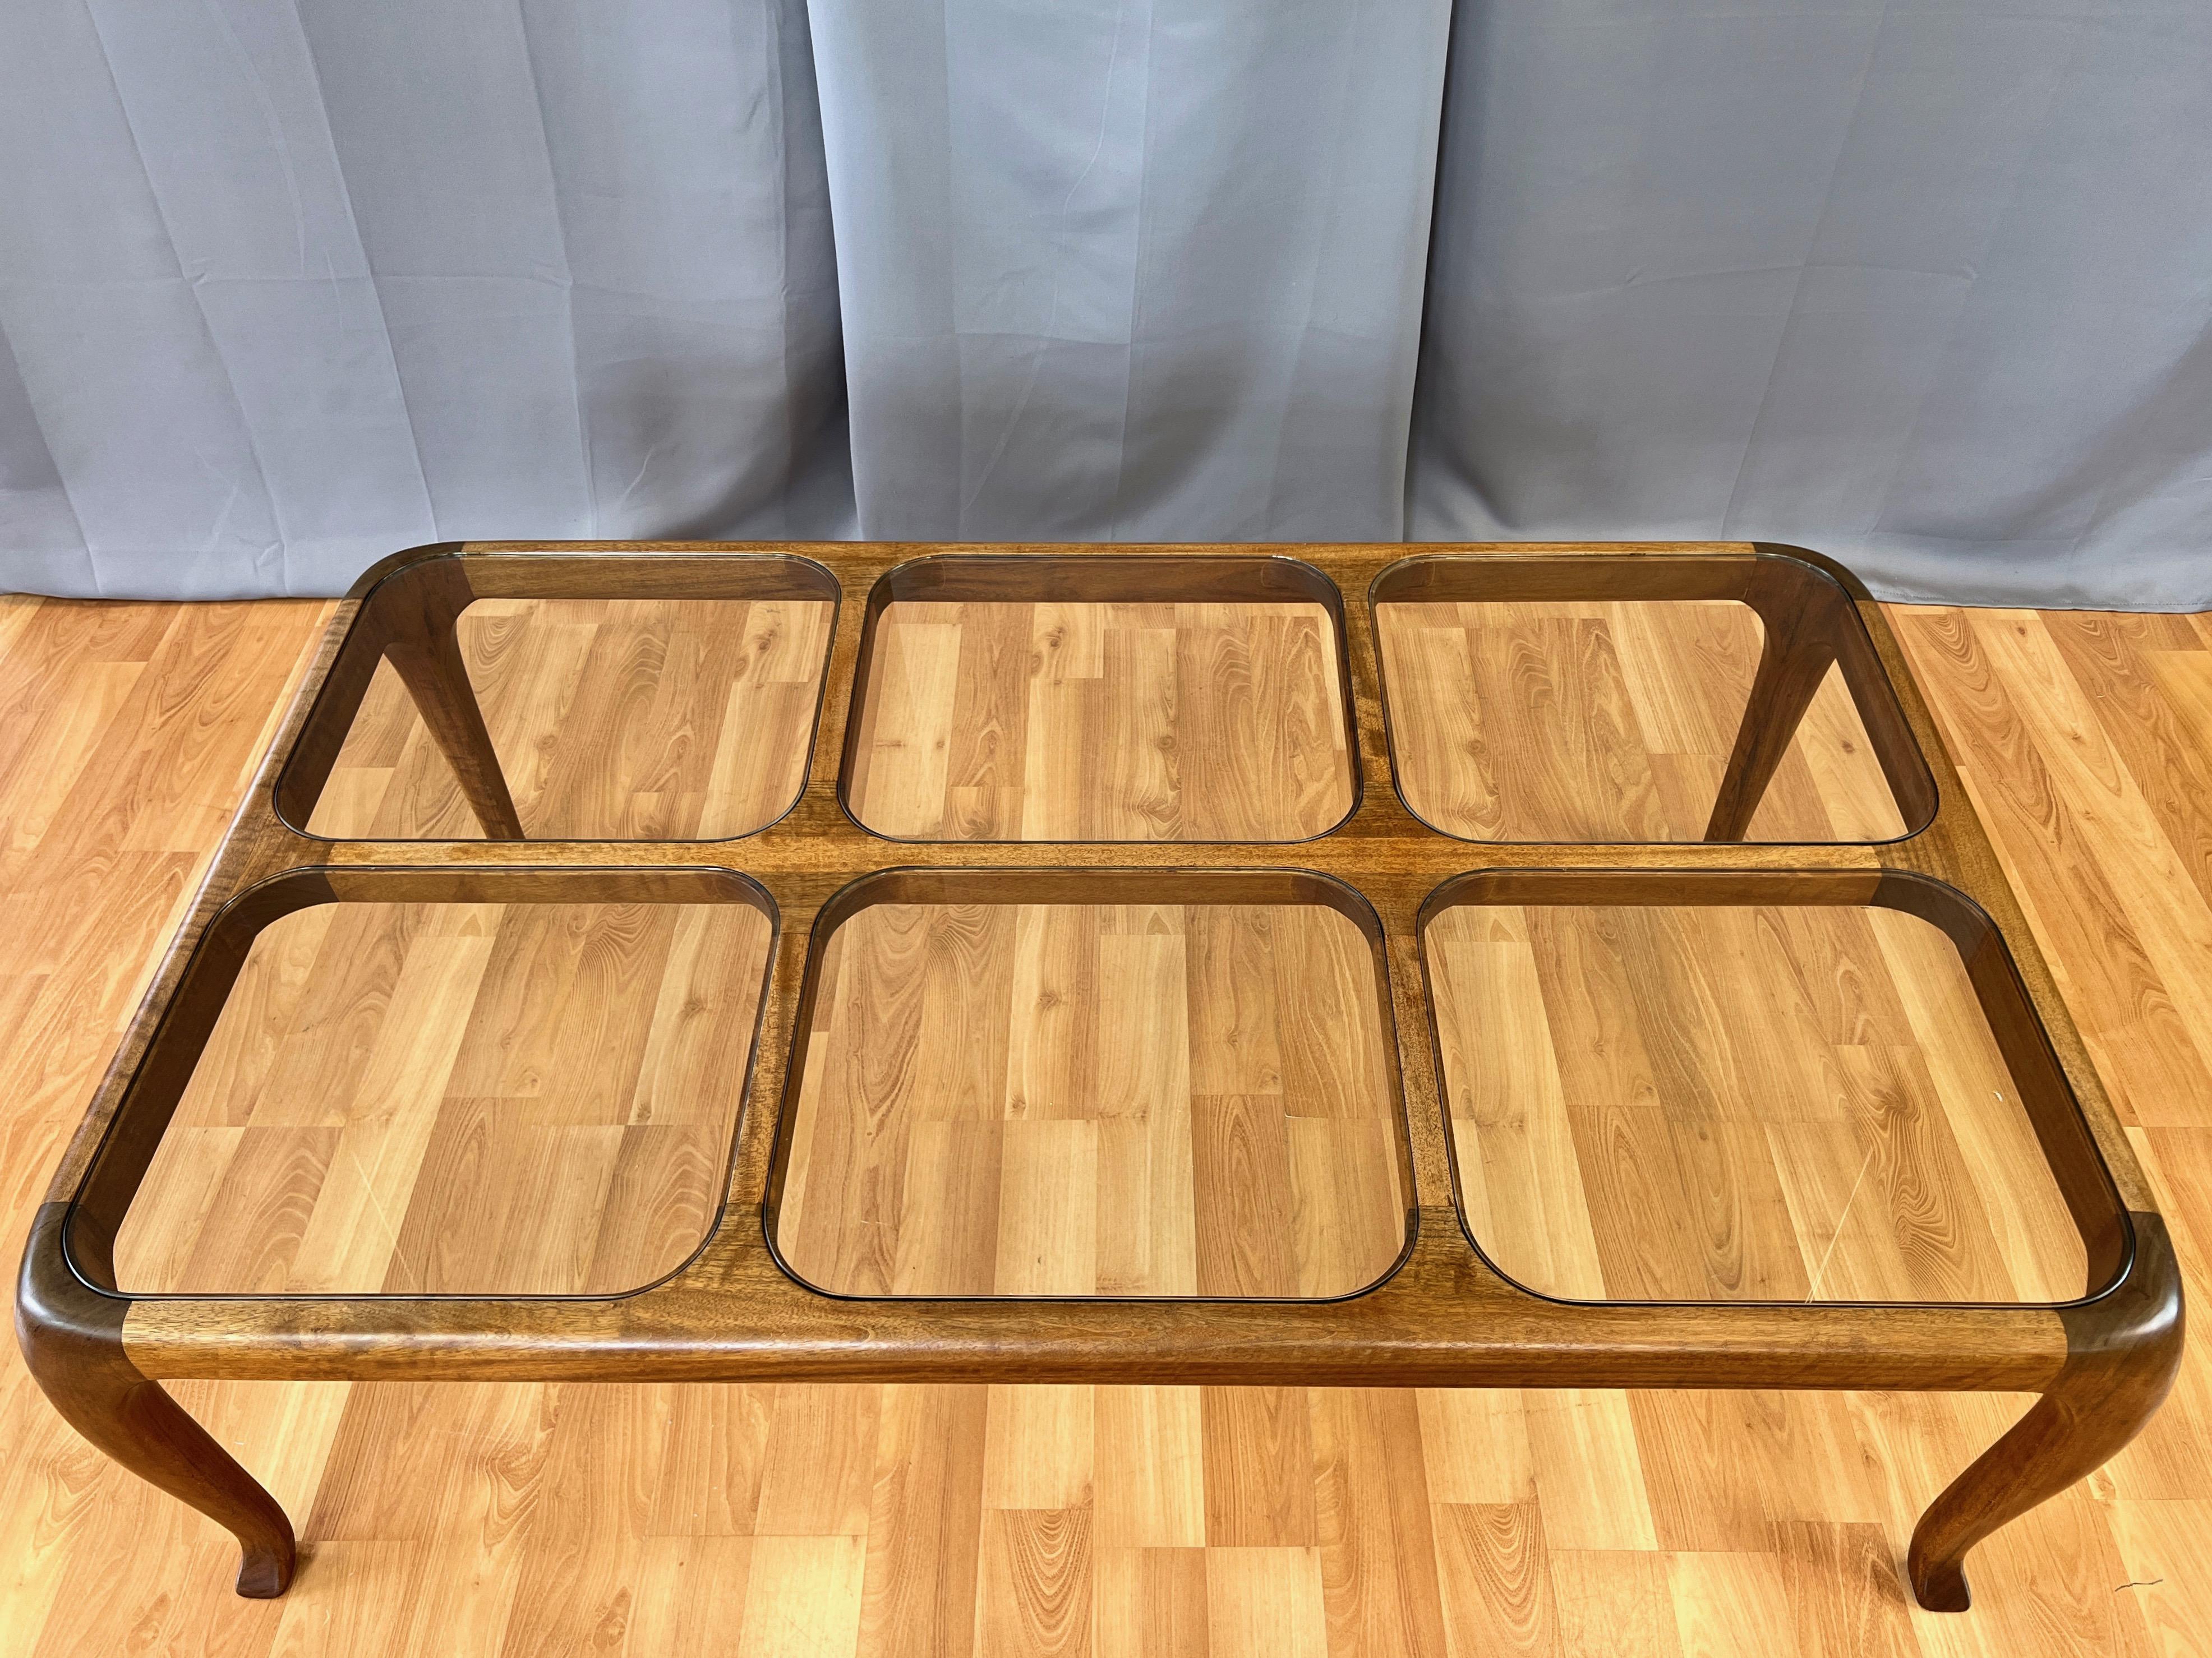 Thomas Saydah Large Walnut and Glass Coffee Table, Signed and Dated, 1982 In Good Condition For Sale In San Francisco, CA